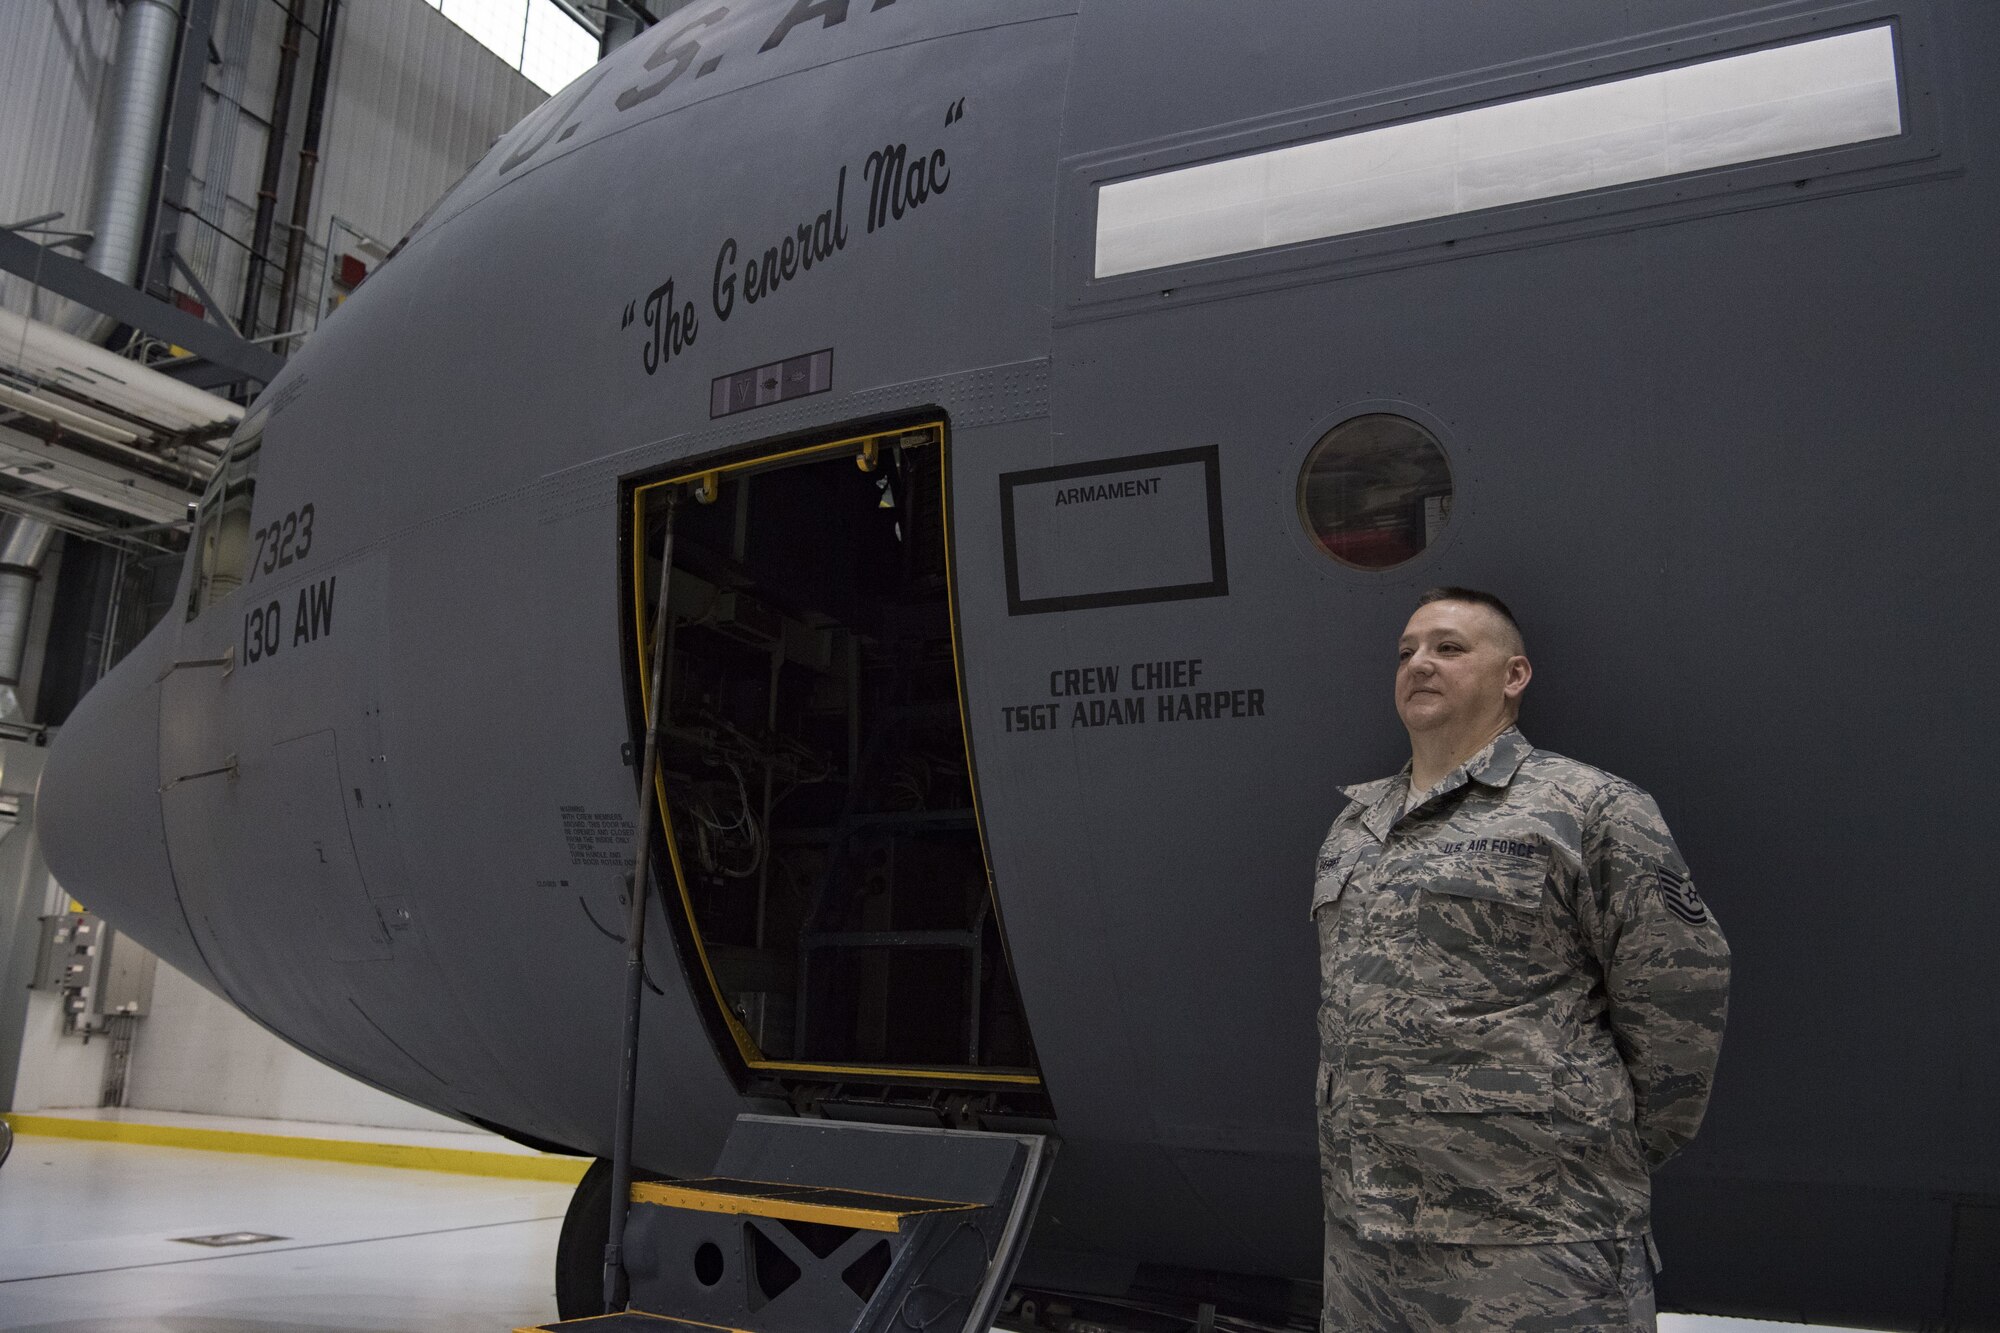 U.S. Air Force Tech. Sgt. Adam Harper, a crew chief for the 130th Maintenance Group, stands by a C-130H at a plane naming ceremony Dec. 7, 2017 at McLaughlin Air National Guard Base, Charleston, W.Va. The aircraft was given the name “The General Mac” to honor Brig. Gen. (ret) James K. McLaughlin, who founded the West Virginia Air National Guard and was a pilot in World War II with the famous Eight Air Force. (U.S. Air National Guard photo by Tech. Sgt. De-Juan Haley)